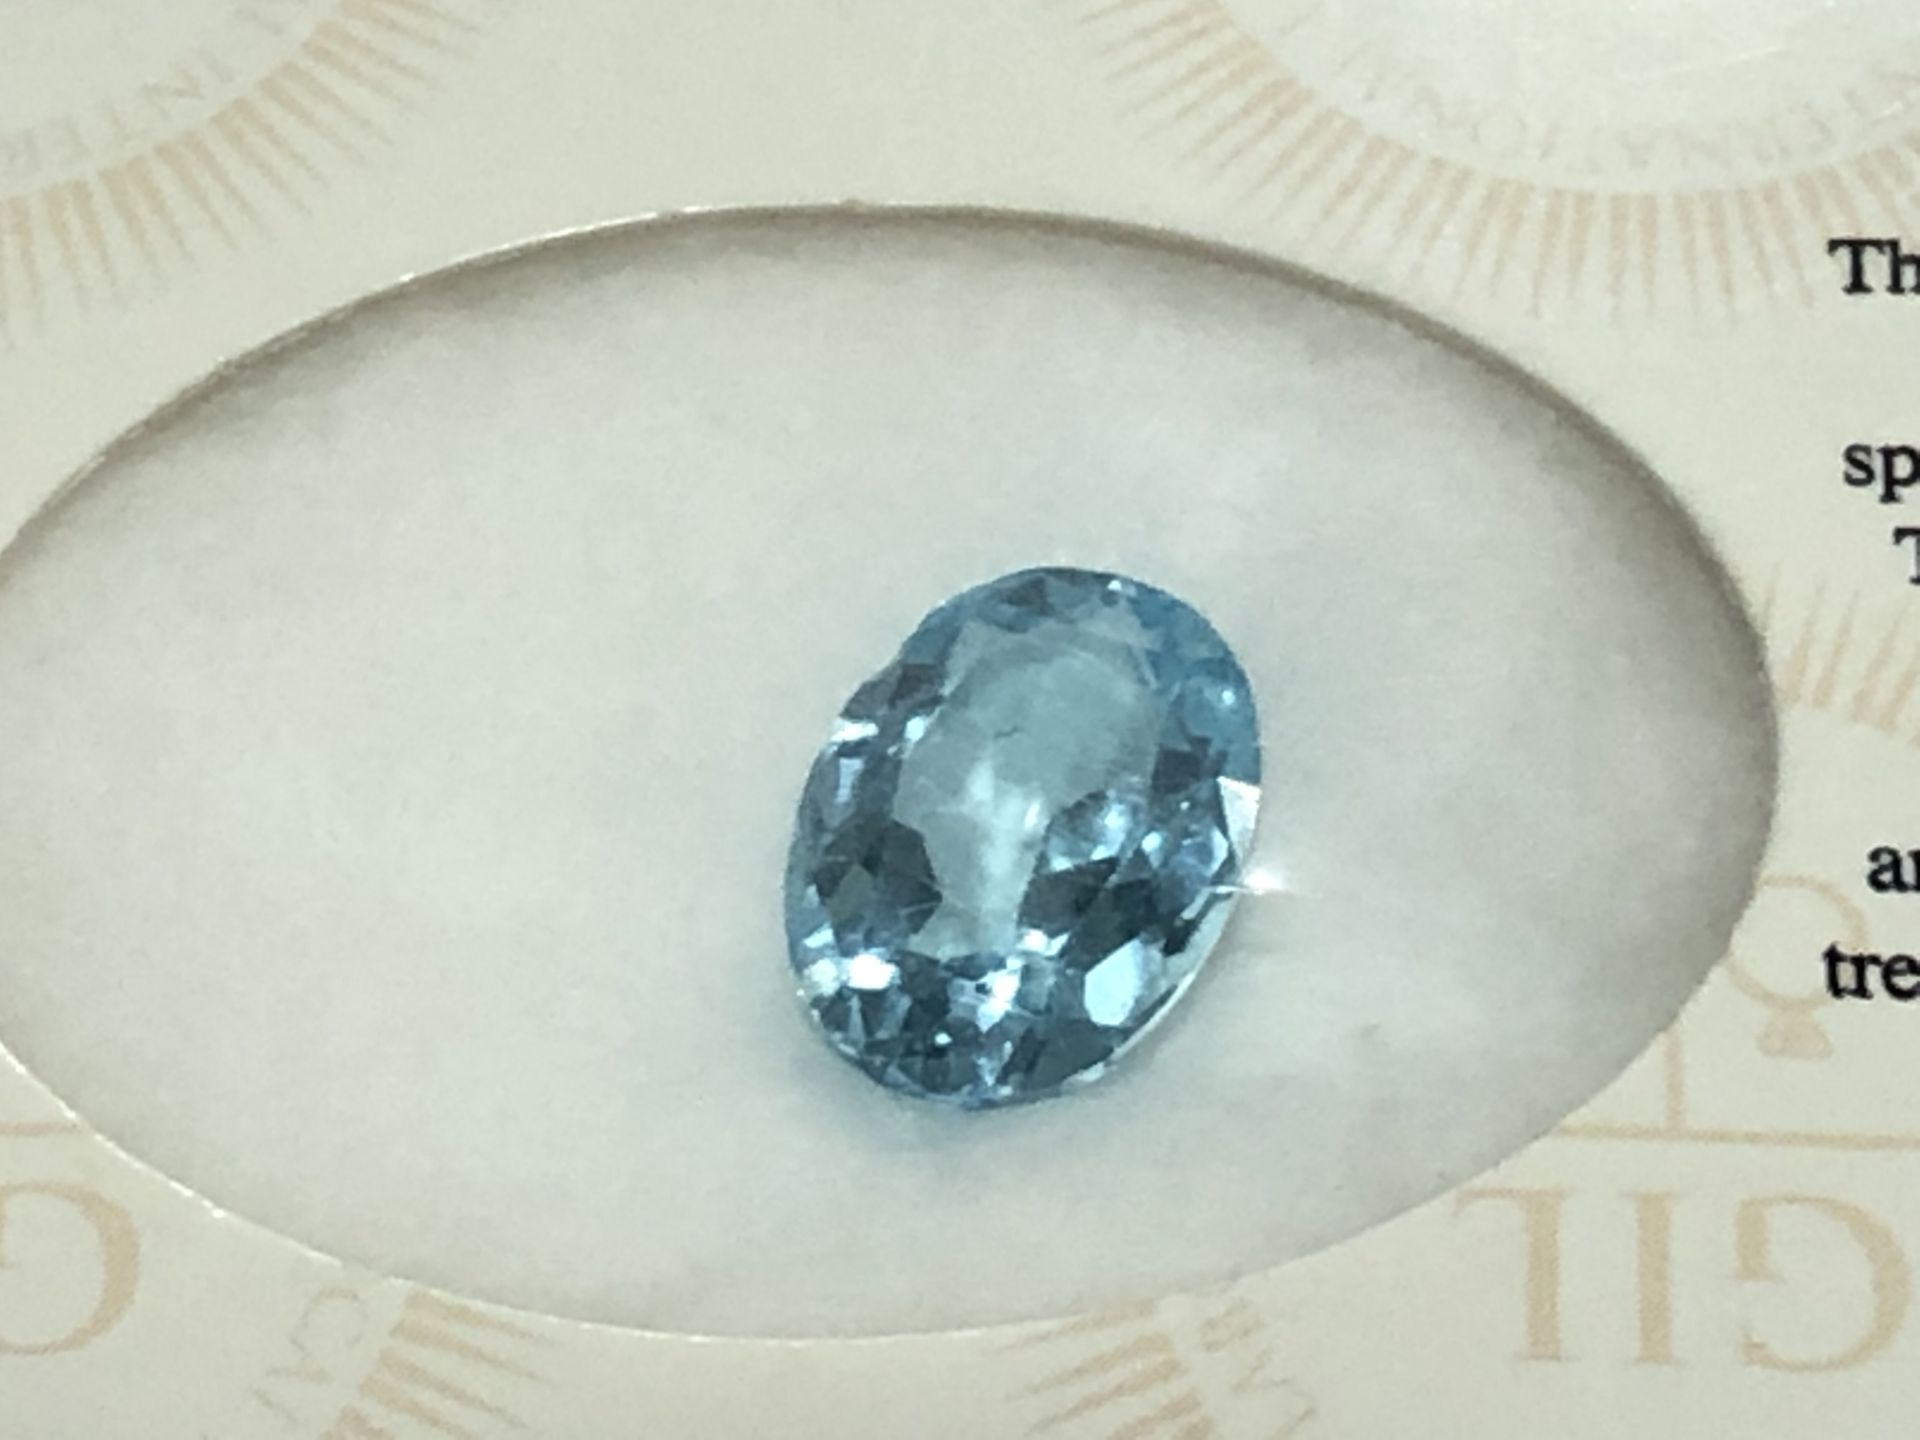 6.79ct Natural Topaz with GIL Certificate - Image 2 of 3